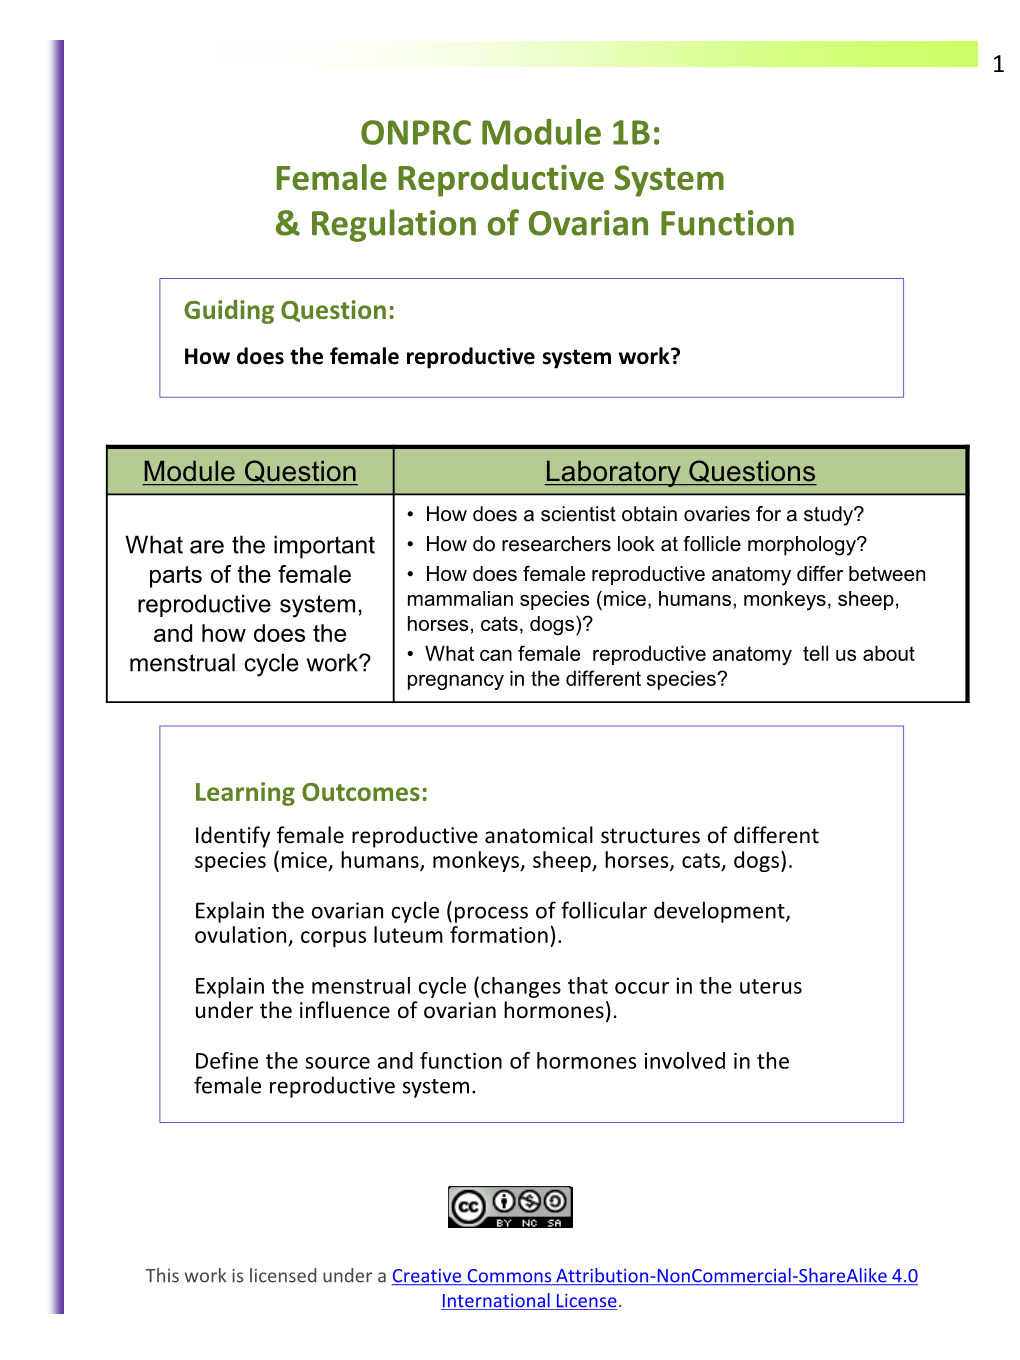 Female Reproductive System & Regulation of Ovarian Function